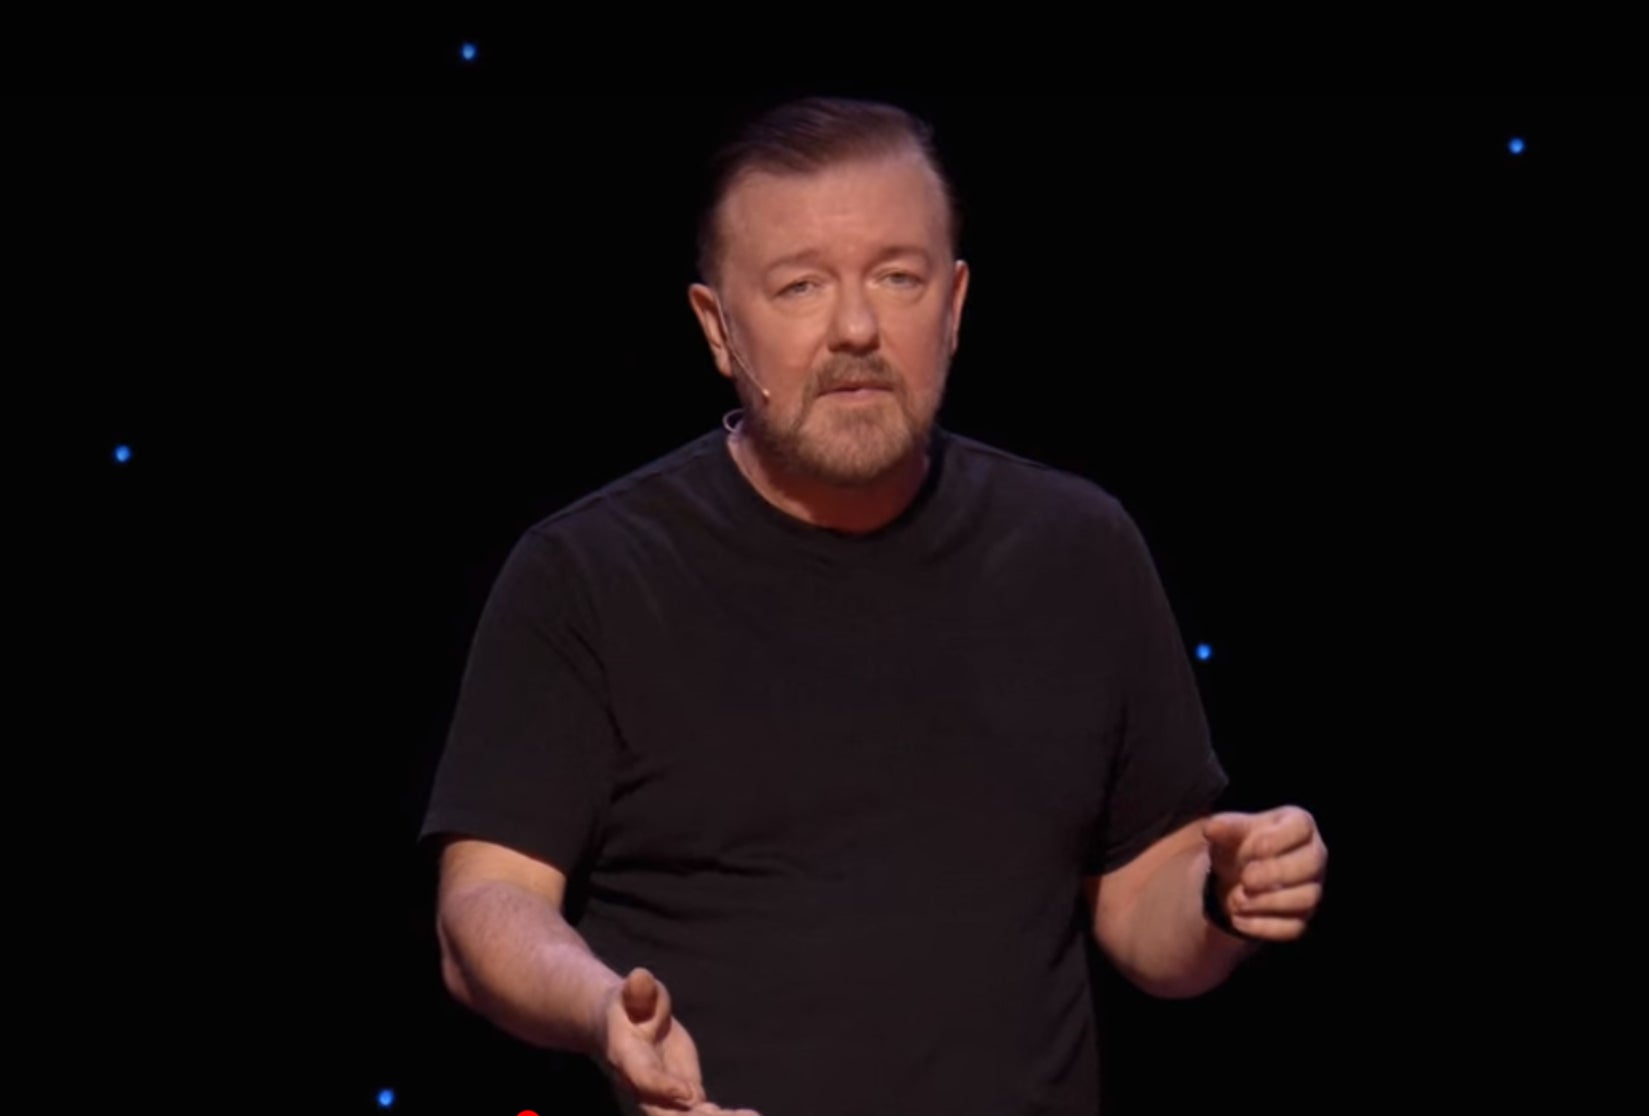 Gervais discussed the controversy in his new special